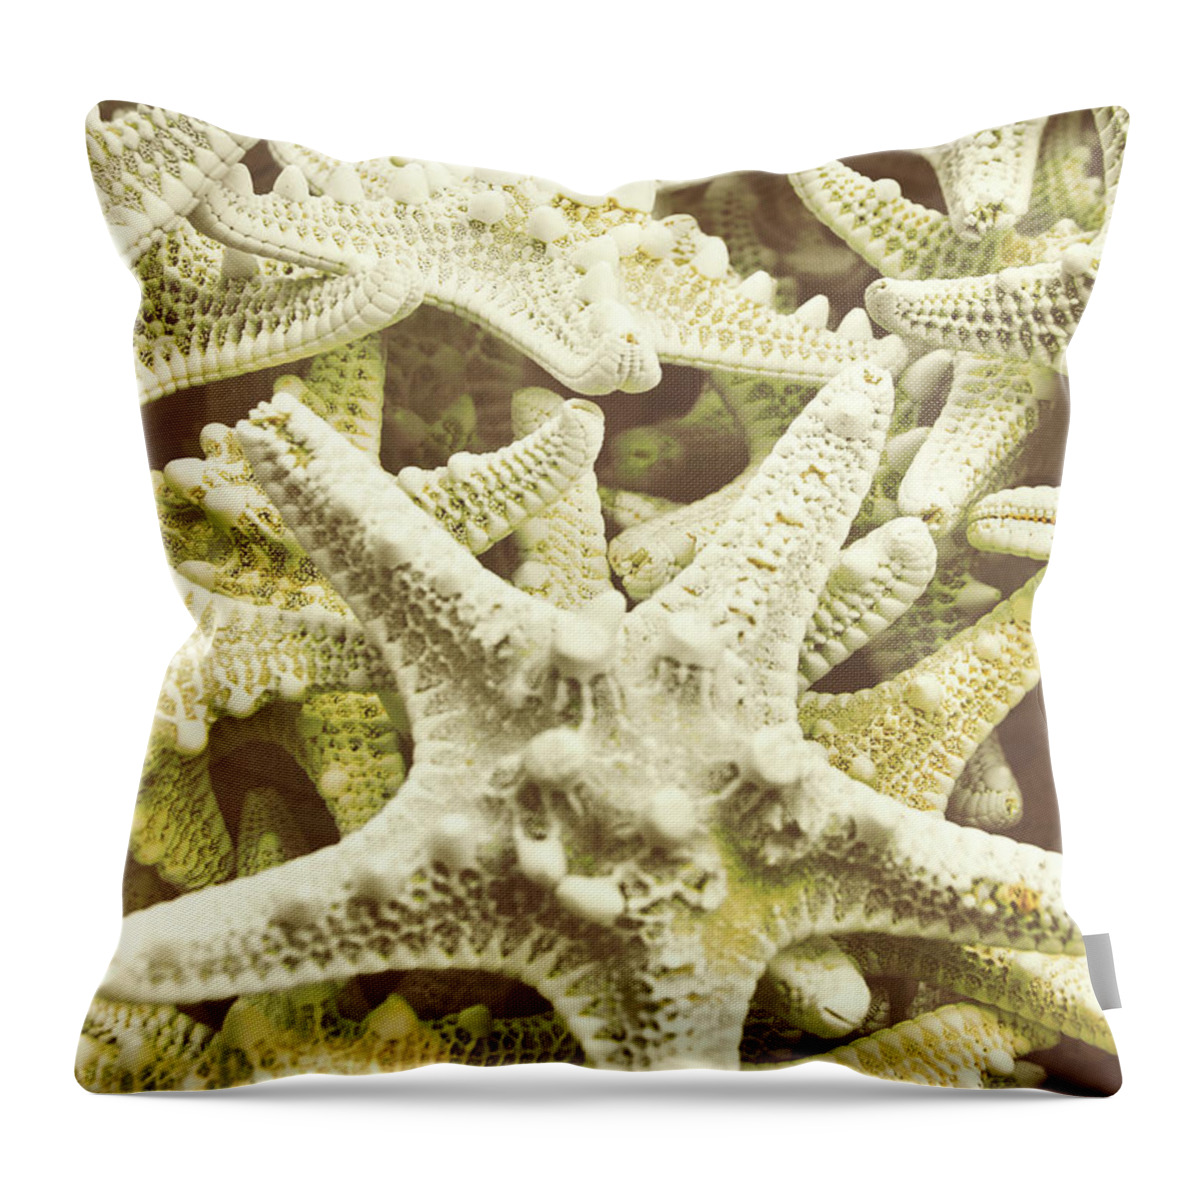 Angels Throw Pillow featuring the photograph Salt Water Stars by JAMART Photography